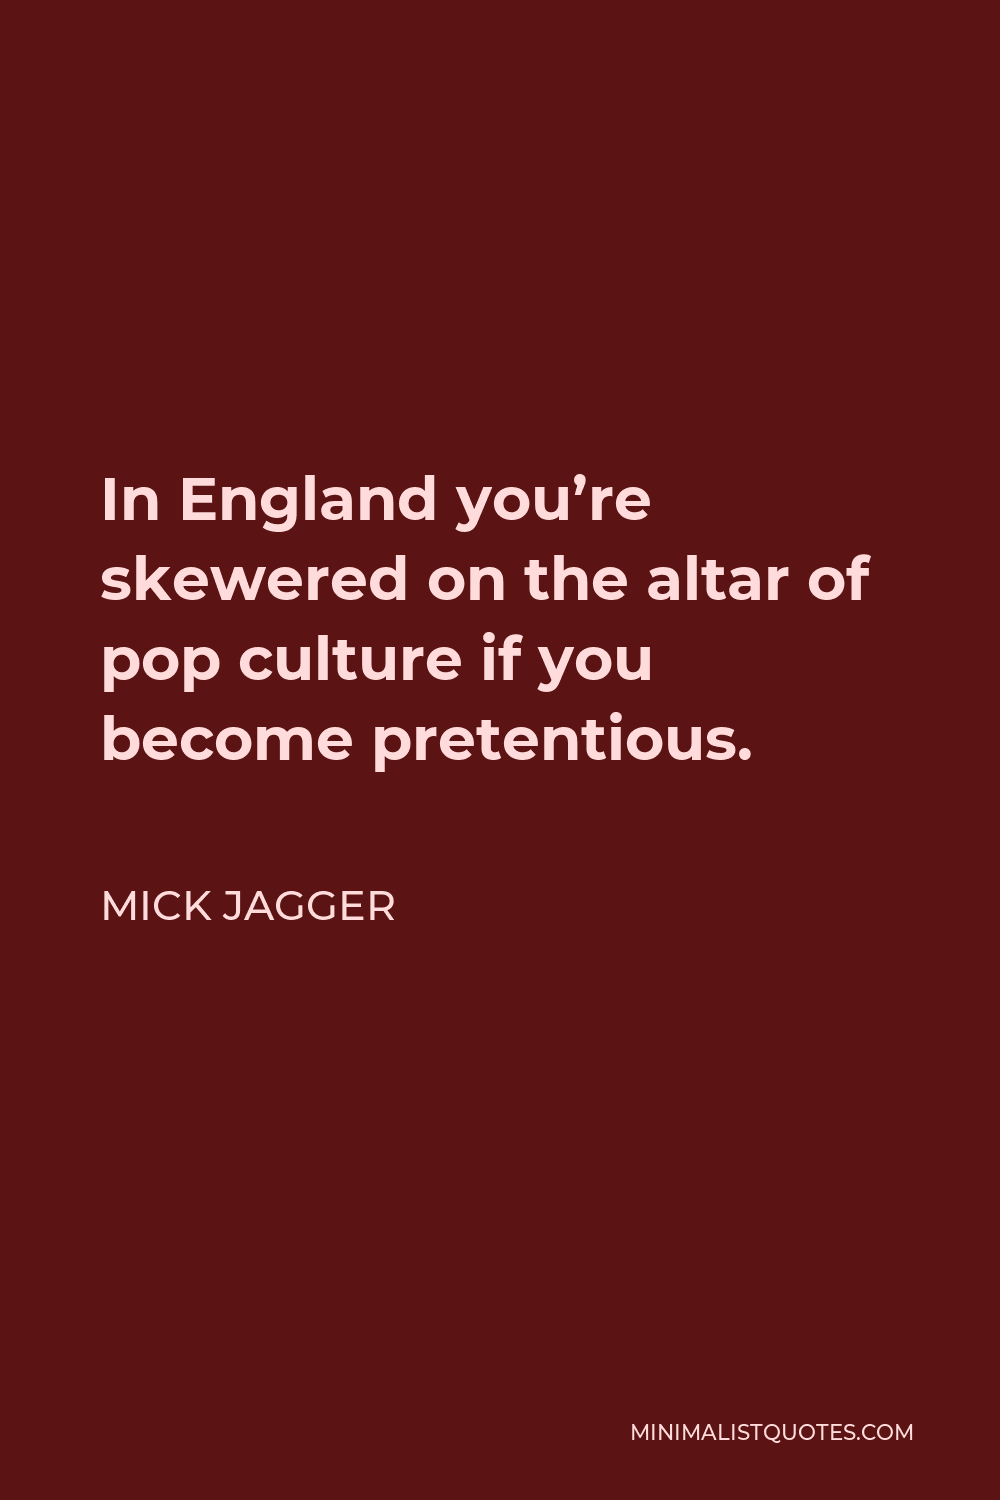 Mick Jagger Quote - In England you’re skewered on the altar of pop culture if you become pretentious.